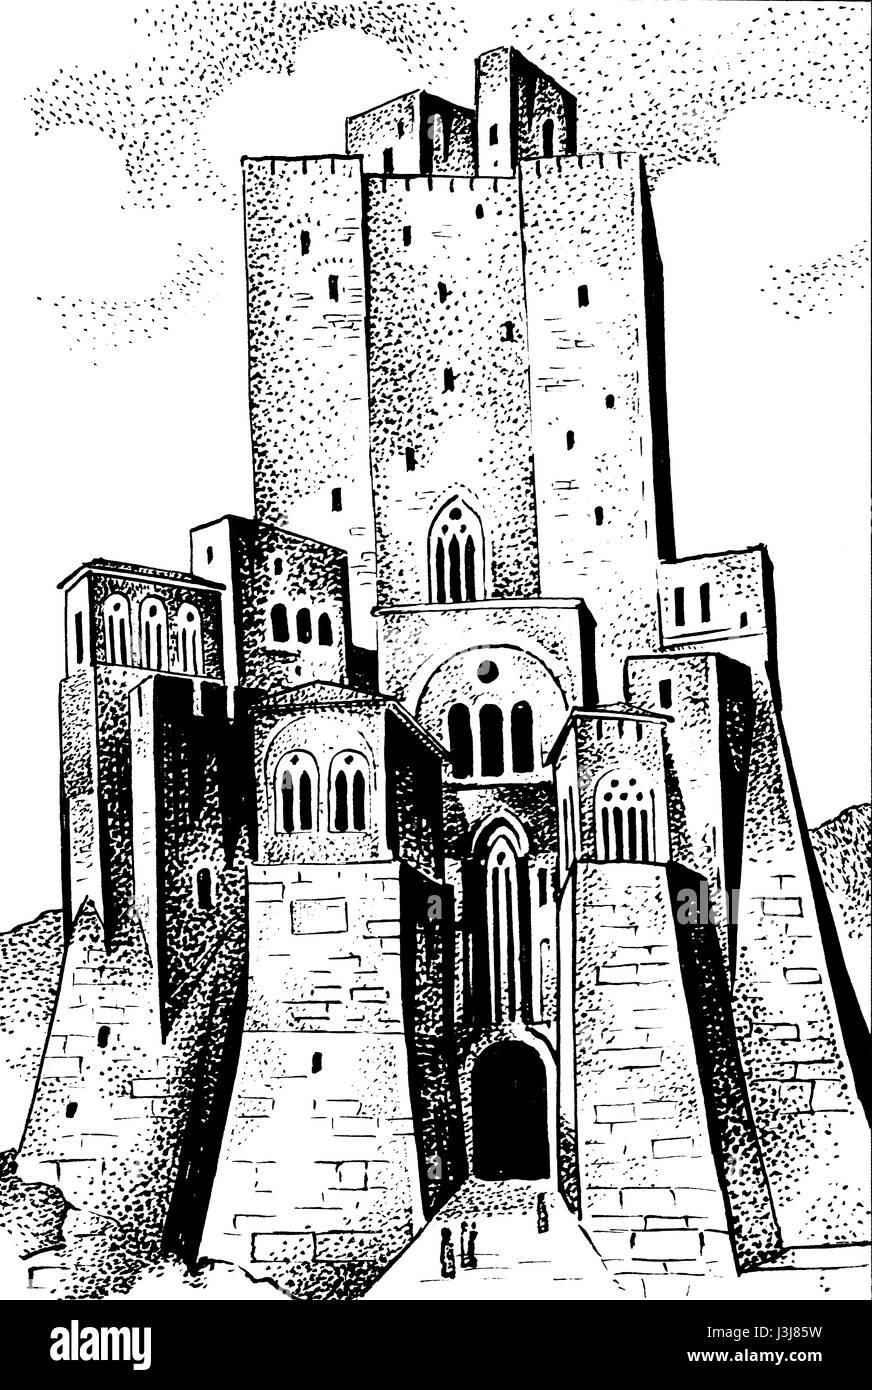 medieval hand drawn city with castle and wall european or italian town vintage illustration, ink. Stock Photo